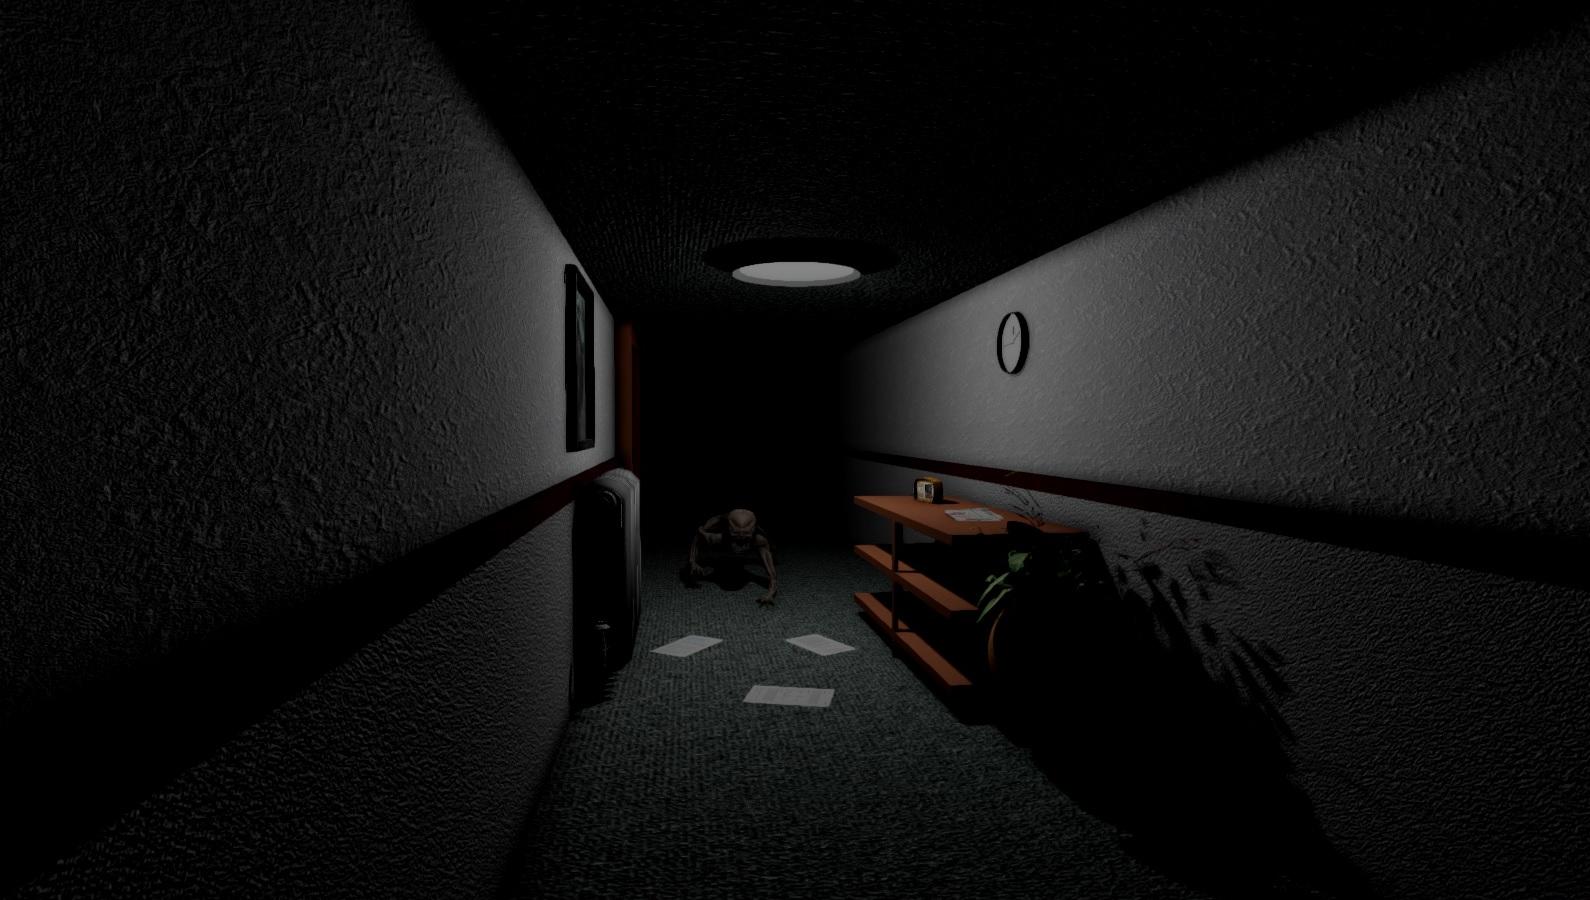 Screenshot №7 from game Shadows 2: Perfidia